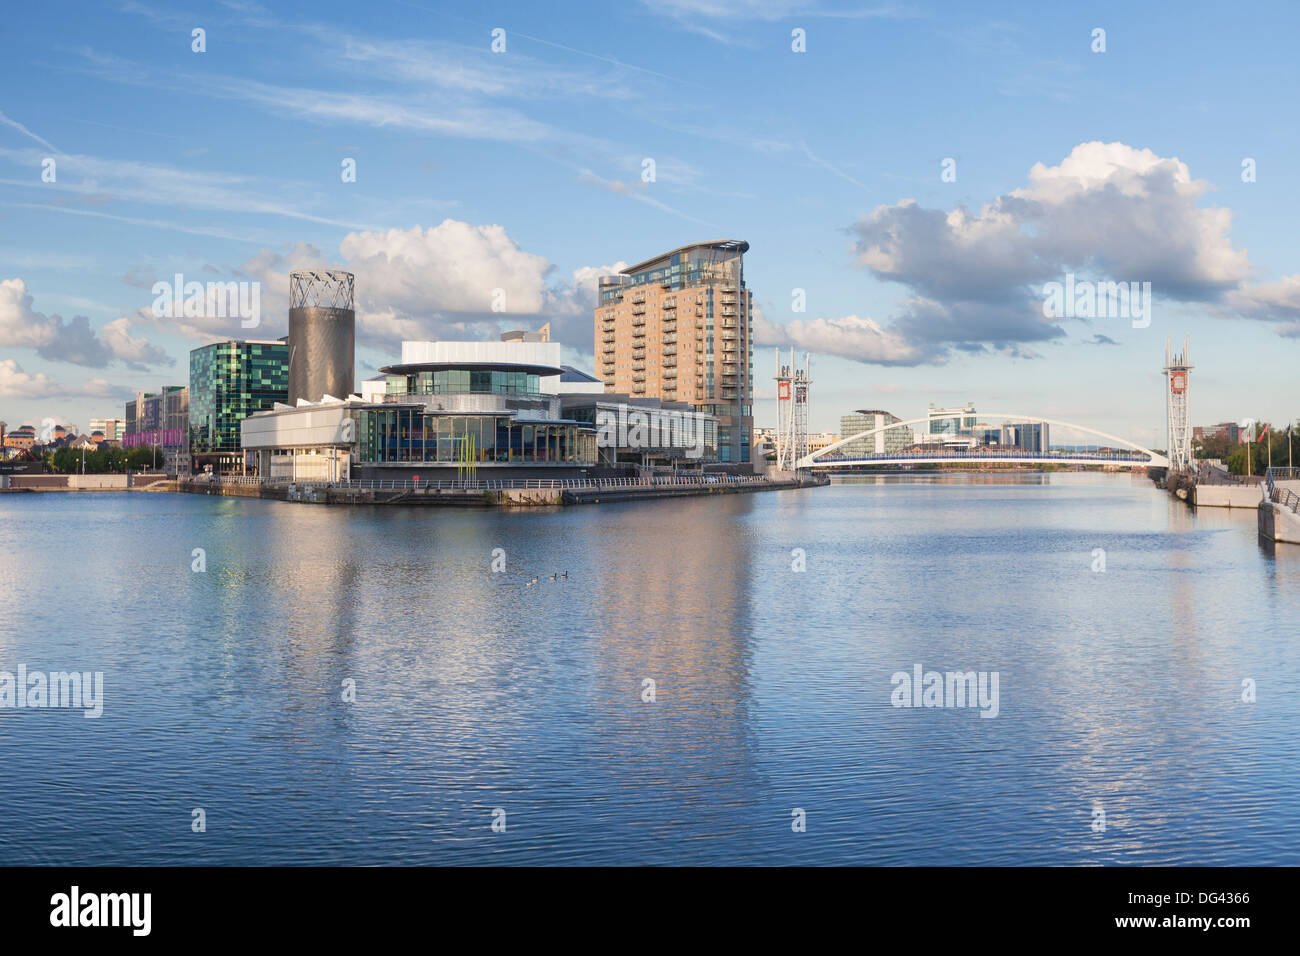 The Lowry theatre, Salford Quays, Manchester, England Stock Photo